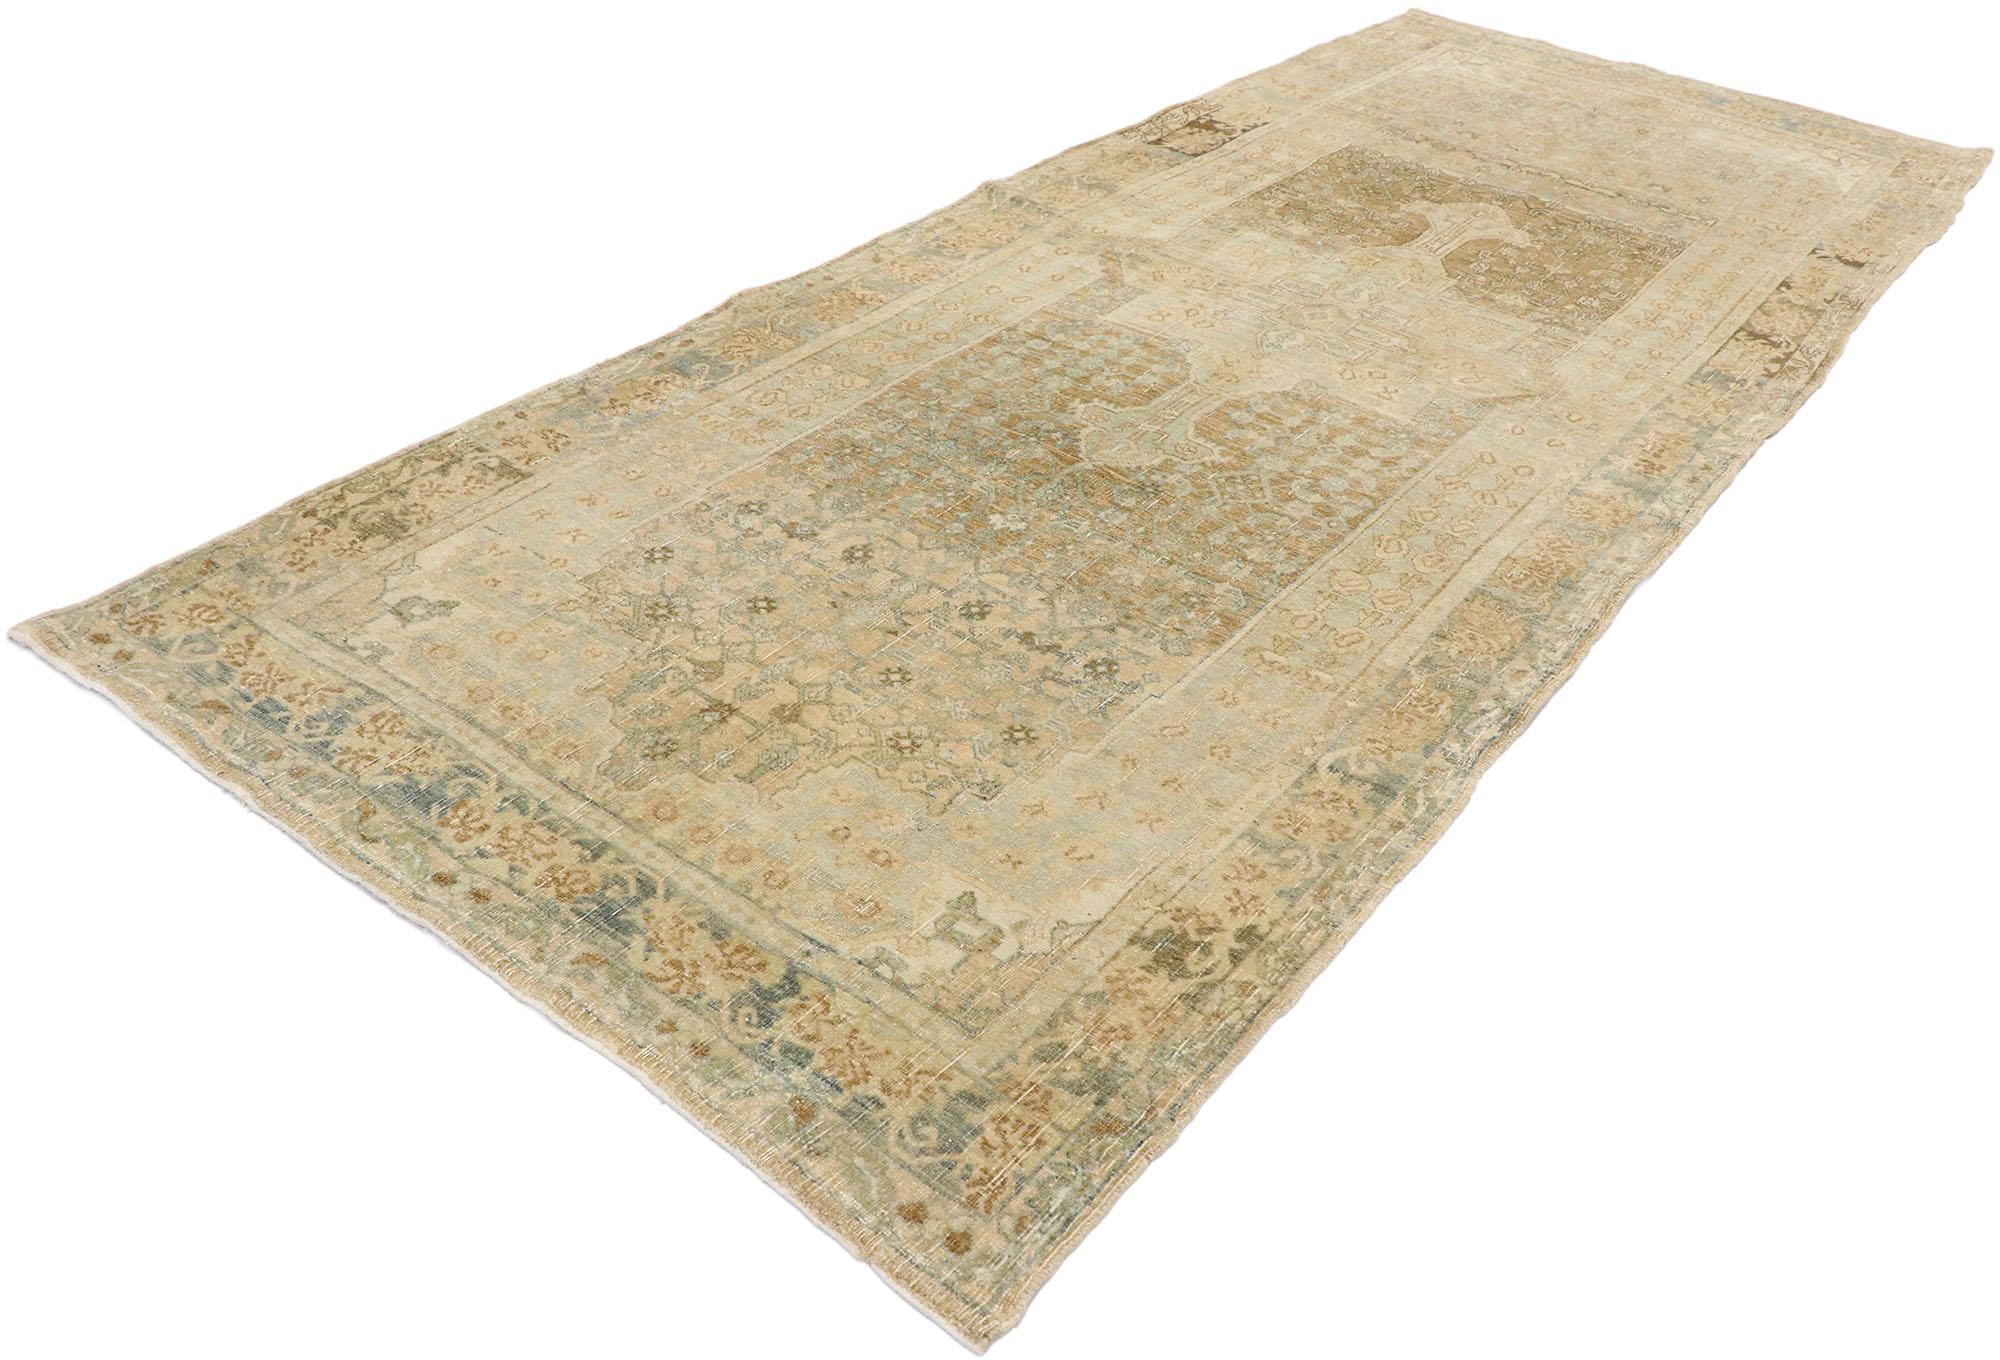 53242, distressed antique Persian Bijar runner with modern rustic shaker style. Warm and inviting with rustic sensibility, this hand knotted wool distressed antique Persian Bijar runner beautifully embodies a modern shaker style. The lovingly